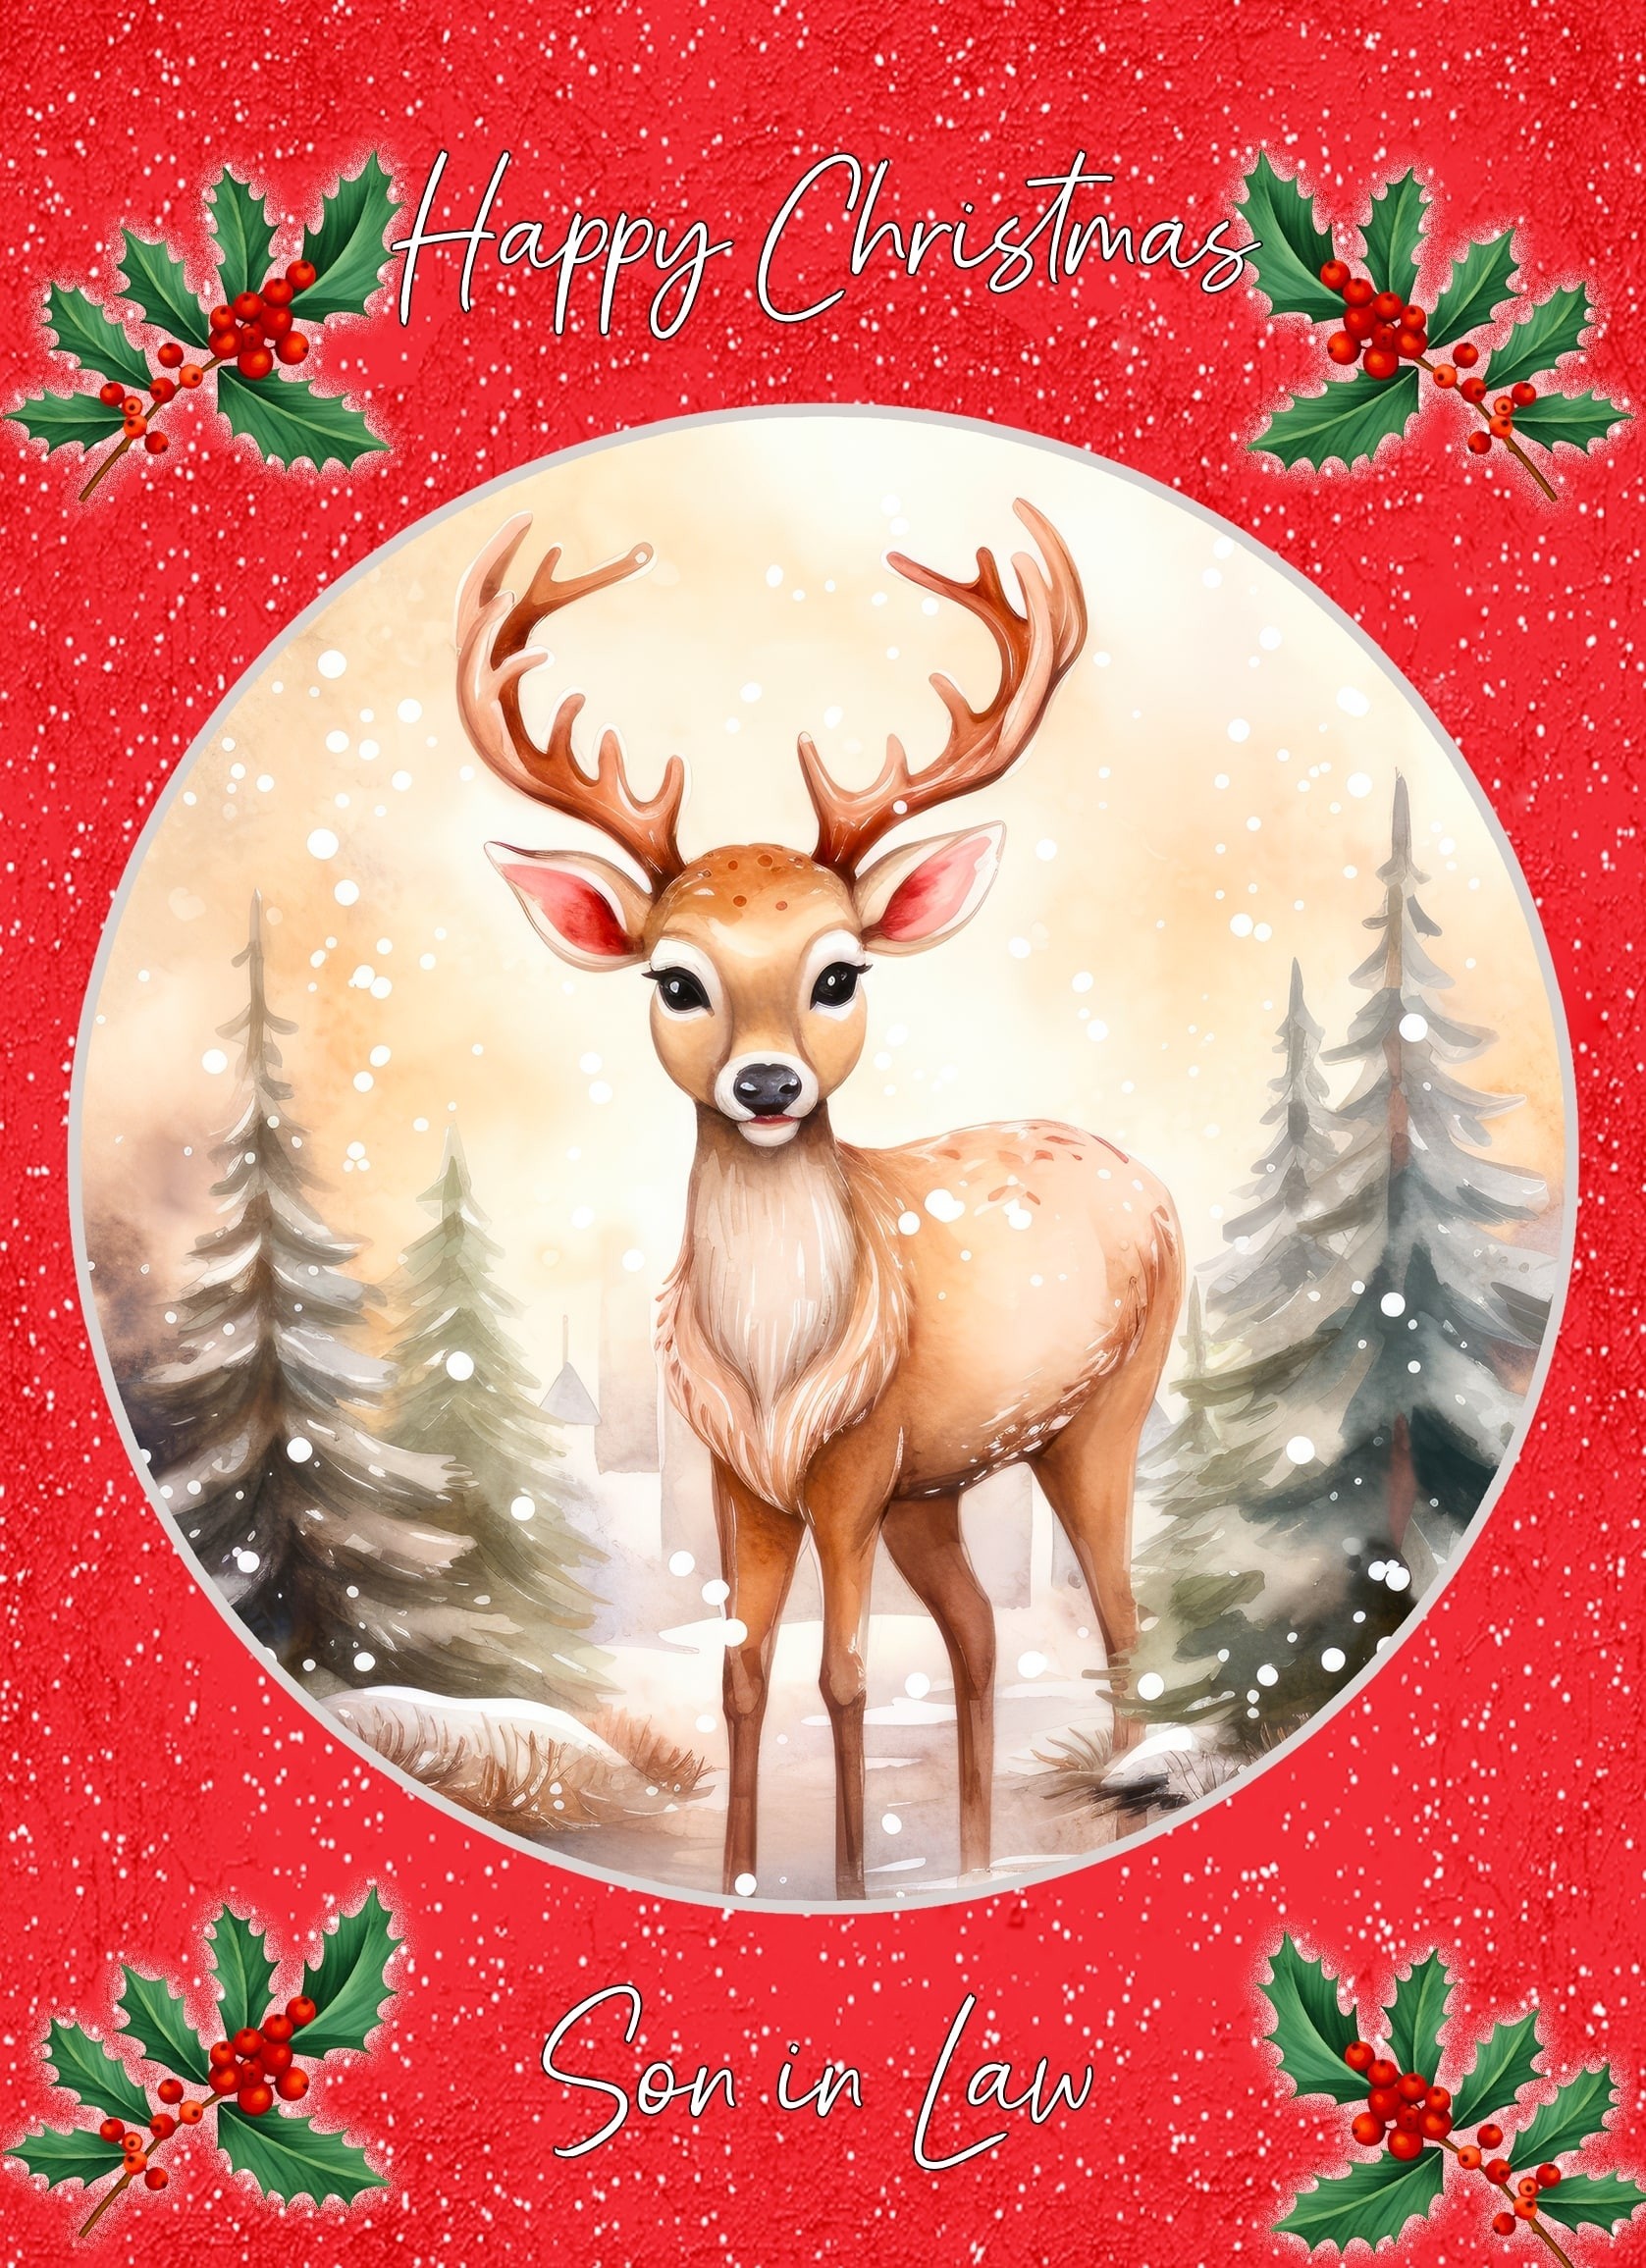 Christmas Card For Son in Law (Globe, Deer)